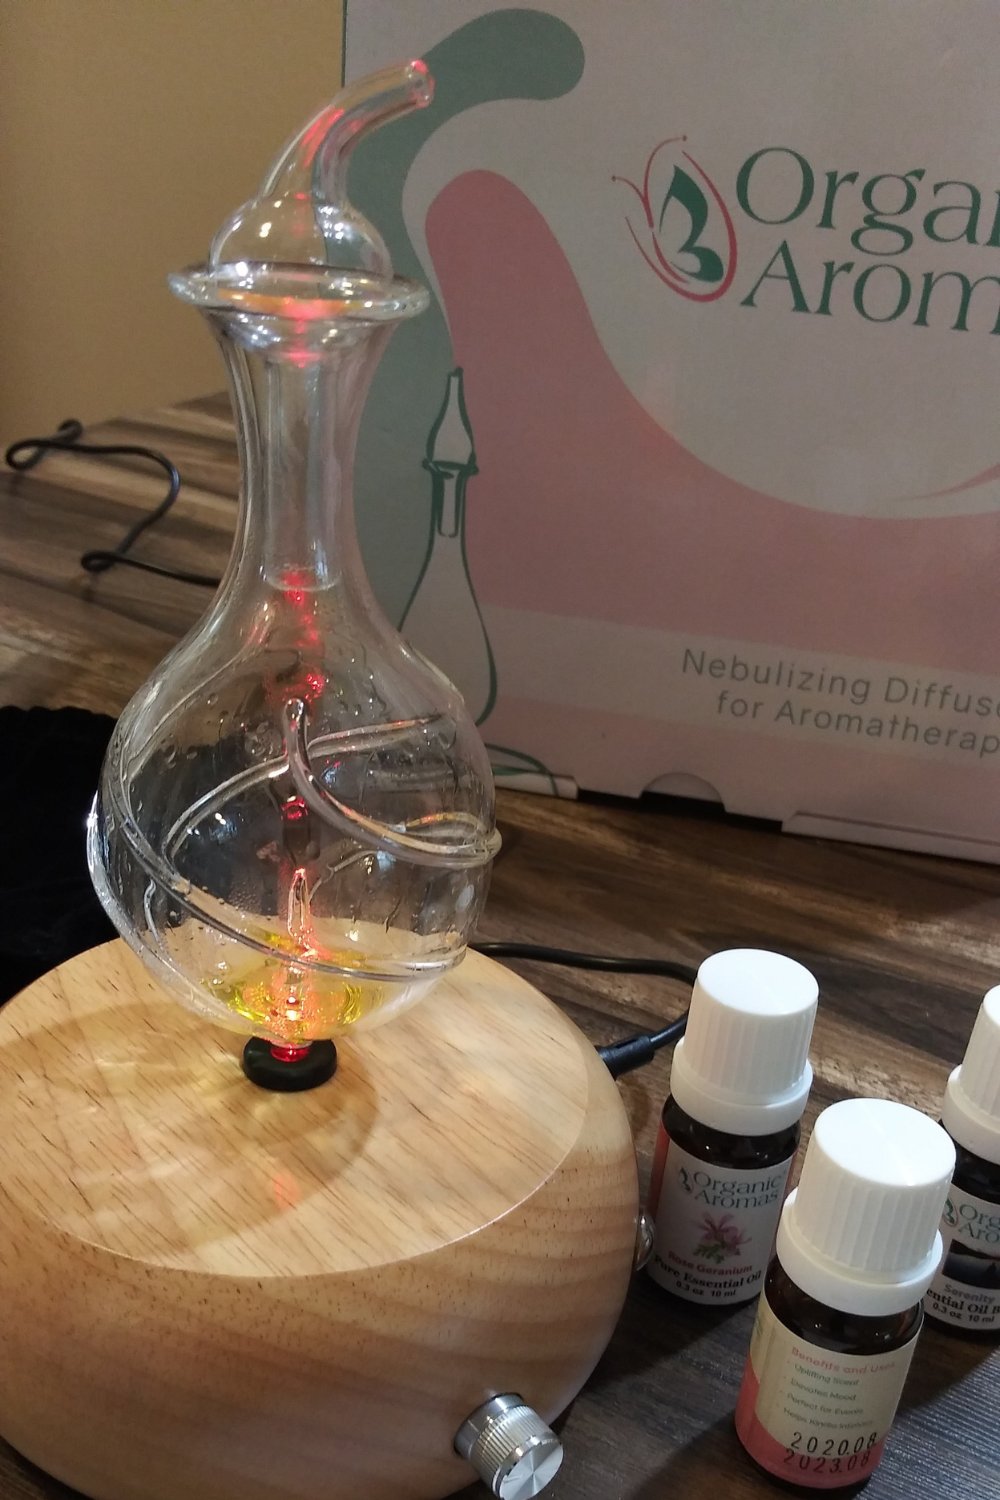 https://organicaromas.com/pages/organic-aromas-monthly-giveaway/